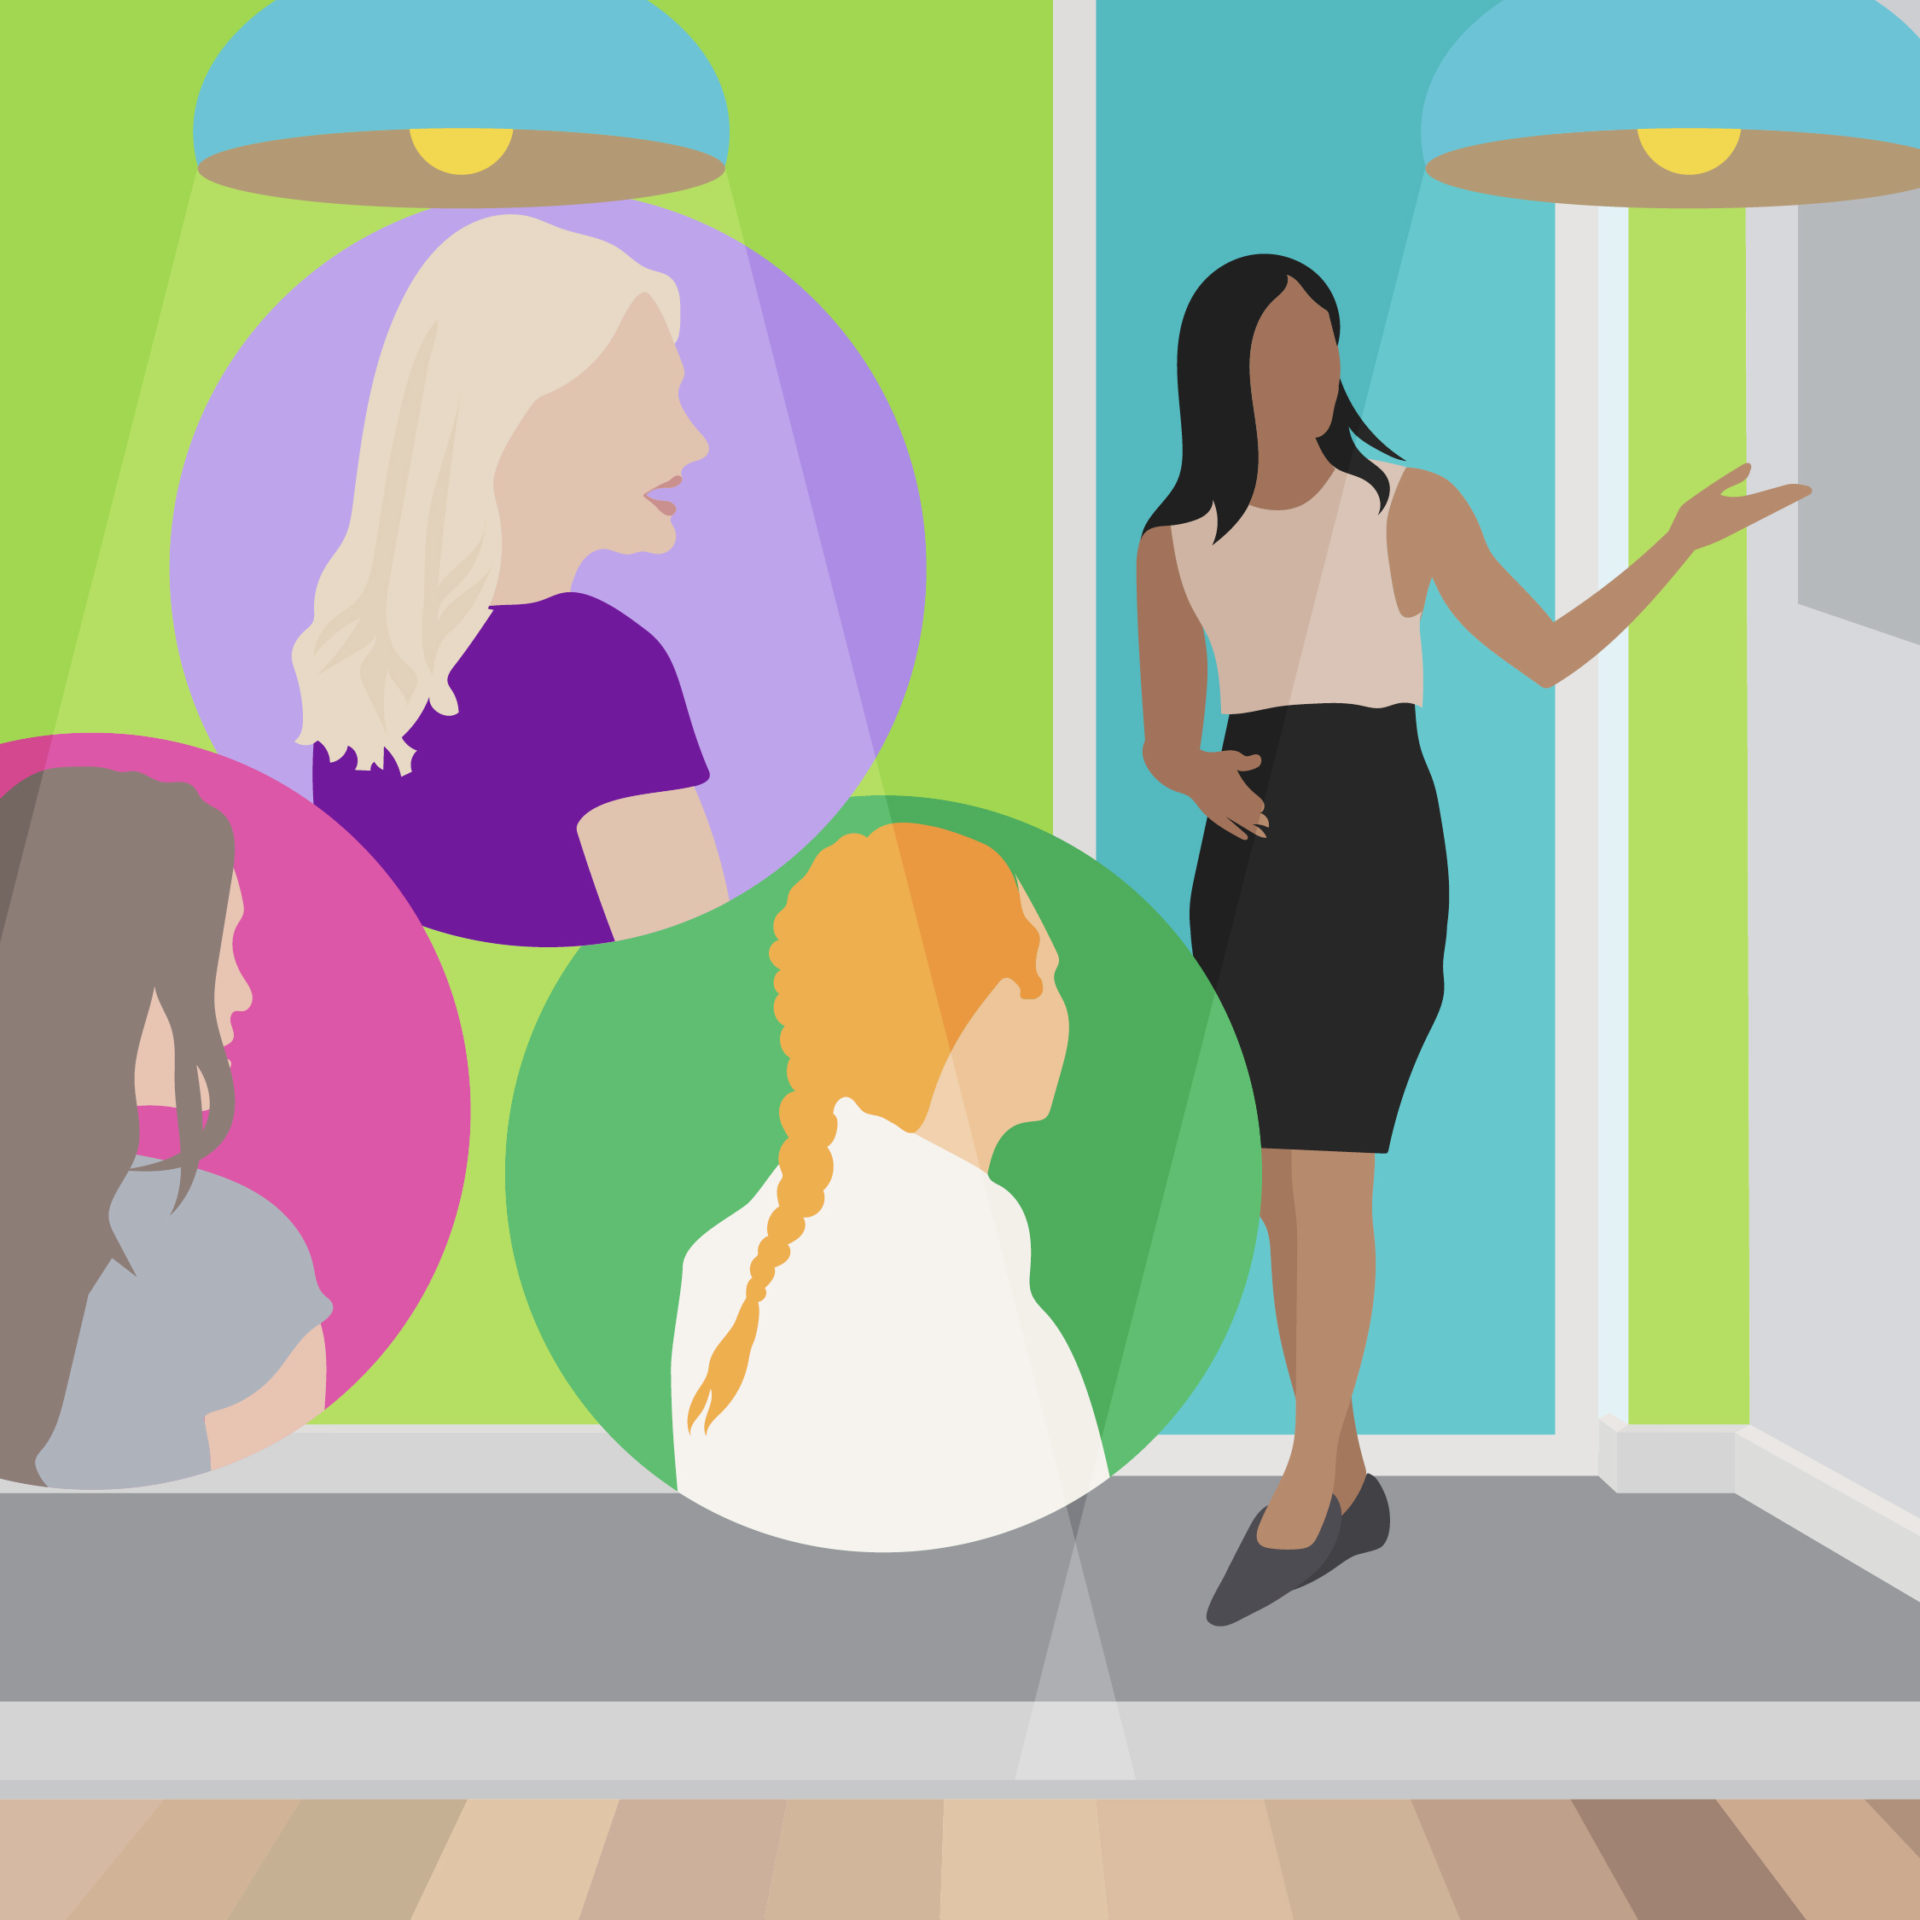 Illustration of a woman standing at the front of a room gesturing toward a presentation while three other women listen.